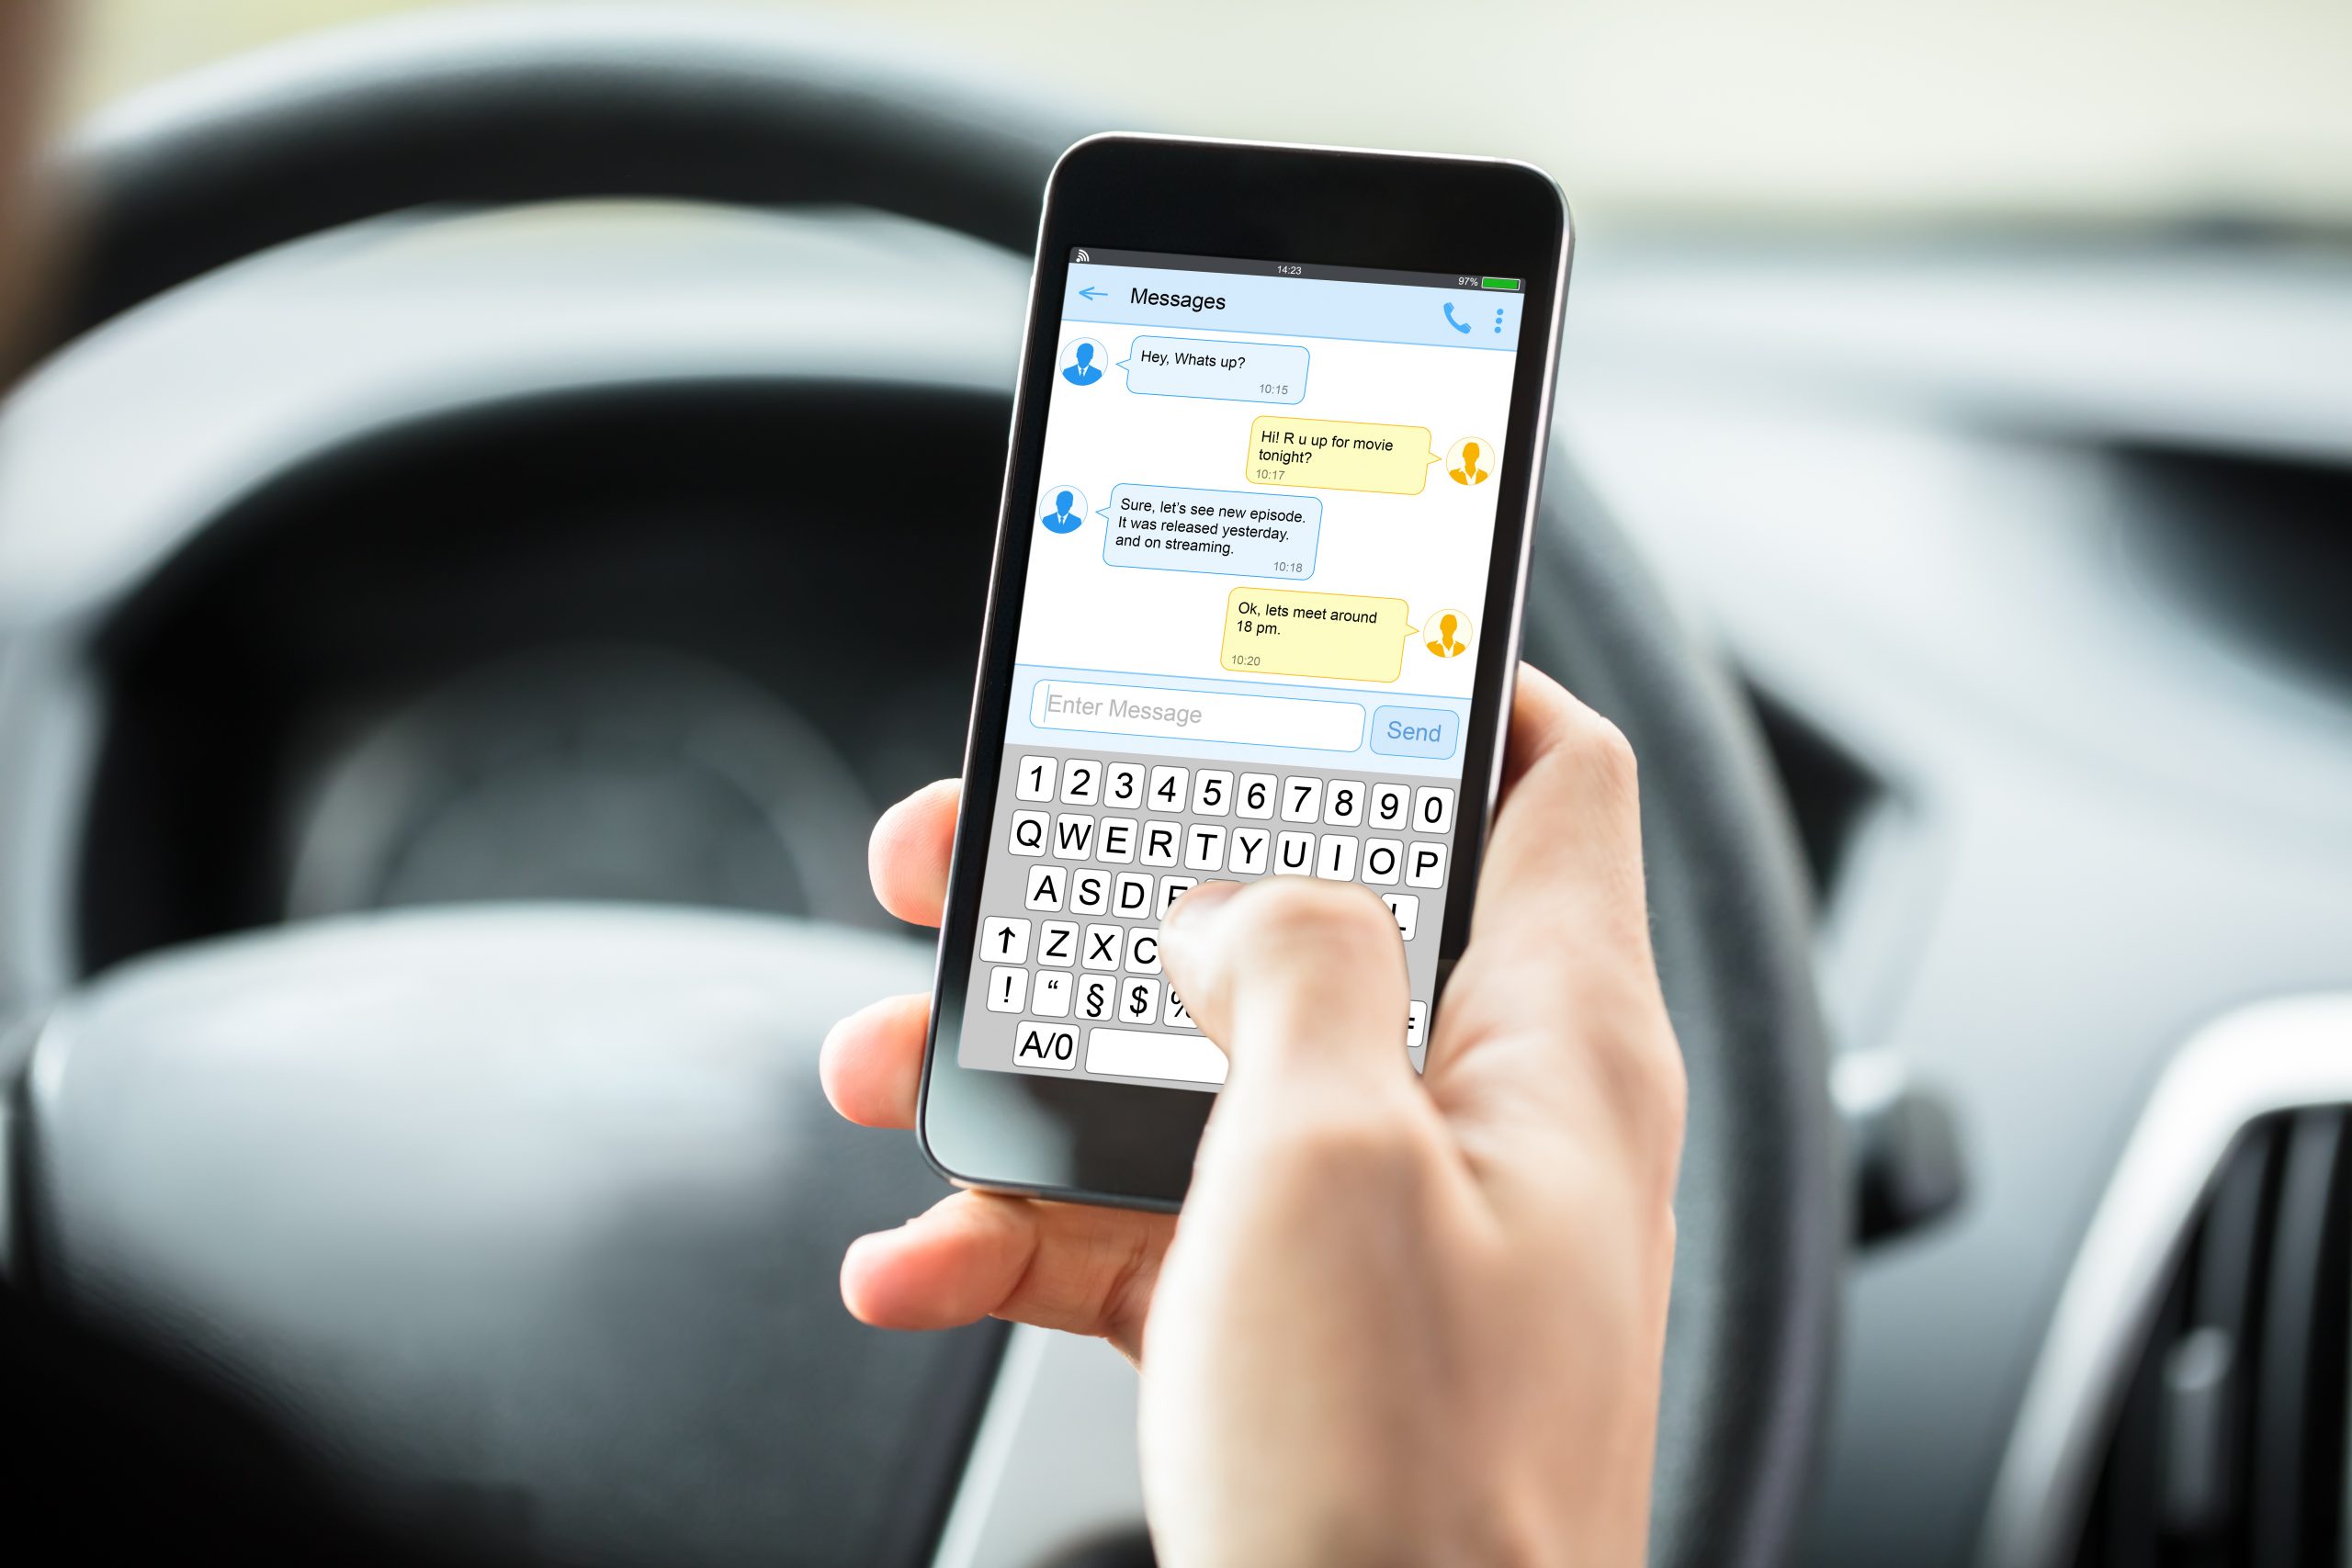 Effectiveness of a Text Message Intervention to Reduce Texting While Driving Among Targeted Young Adults: A Randomized Controlled Trial